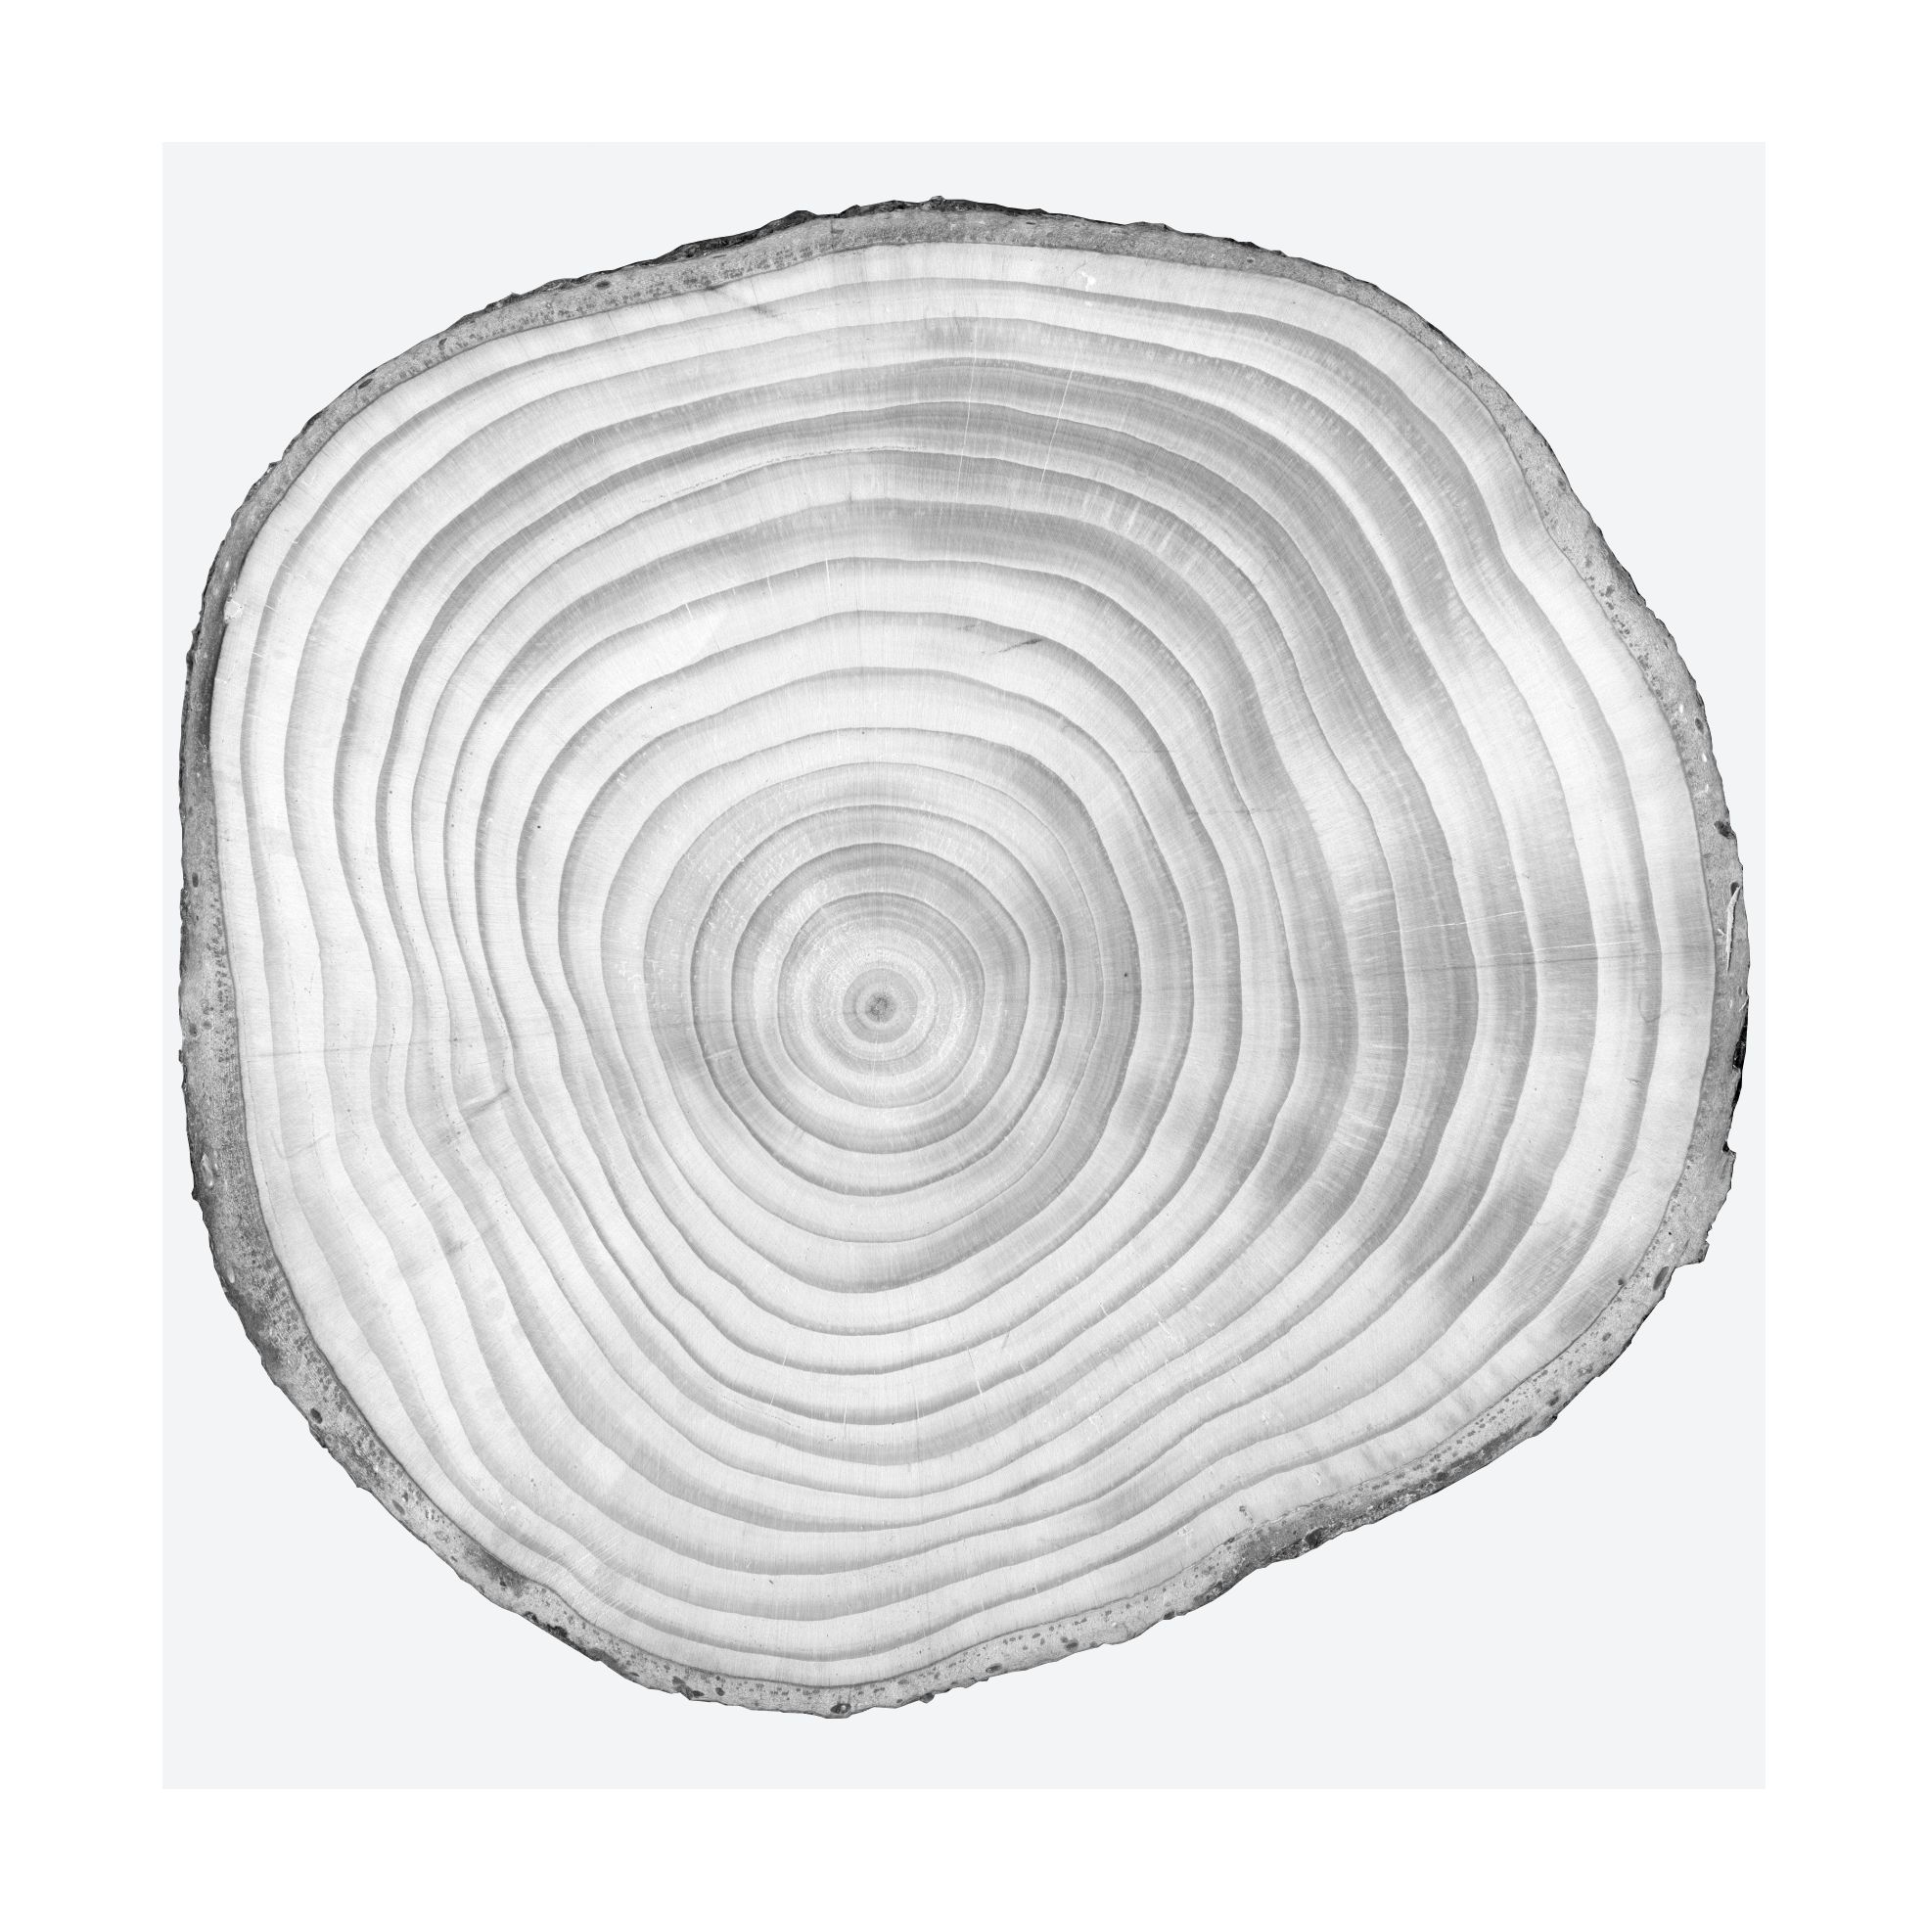 Jan Altman: Tree rings as high-resolution multiproxy recorders of tropical cyclones